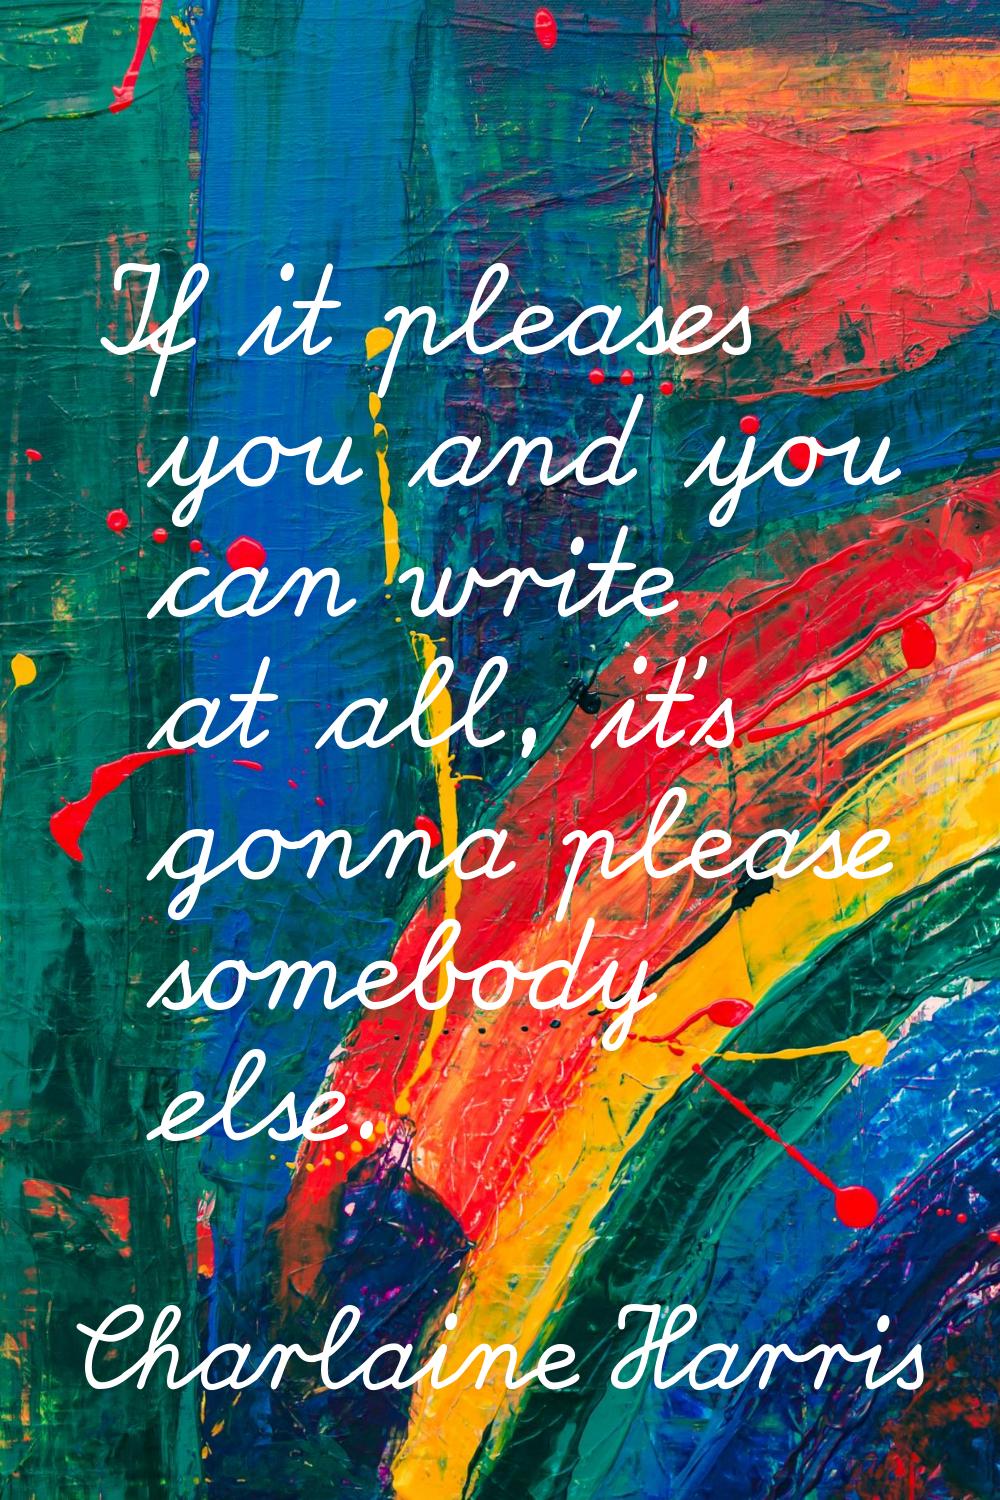 If it pleases you and you can write at all, it's gonna please somebody else.